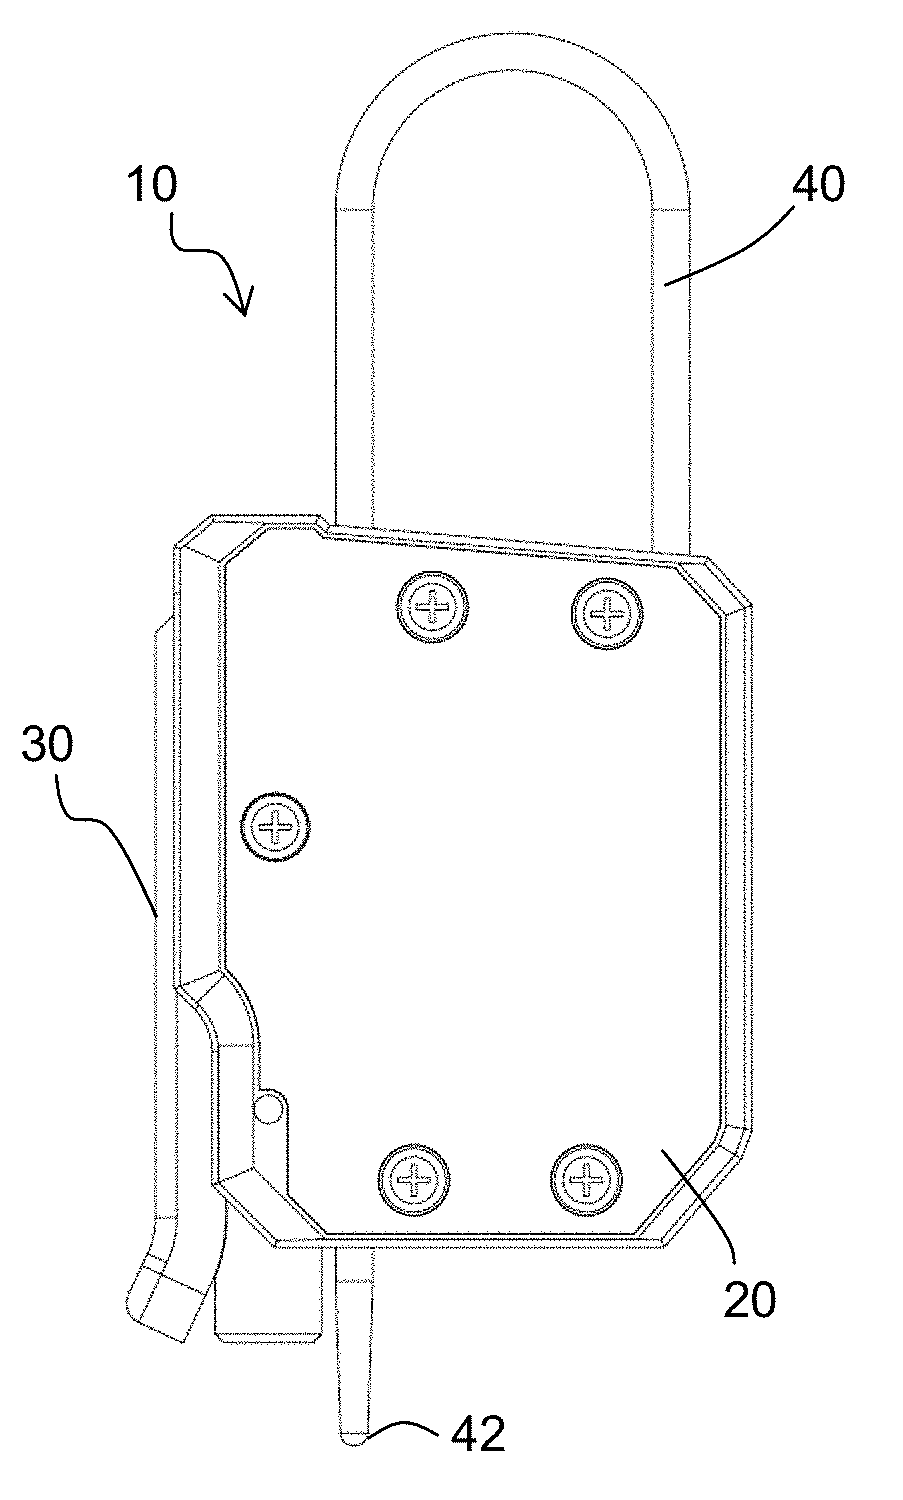 Smart security device and system